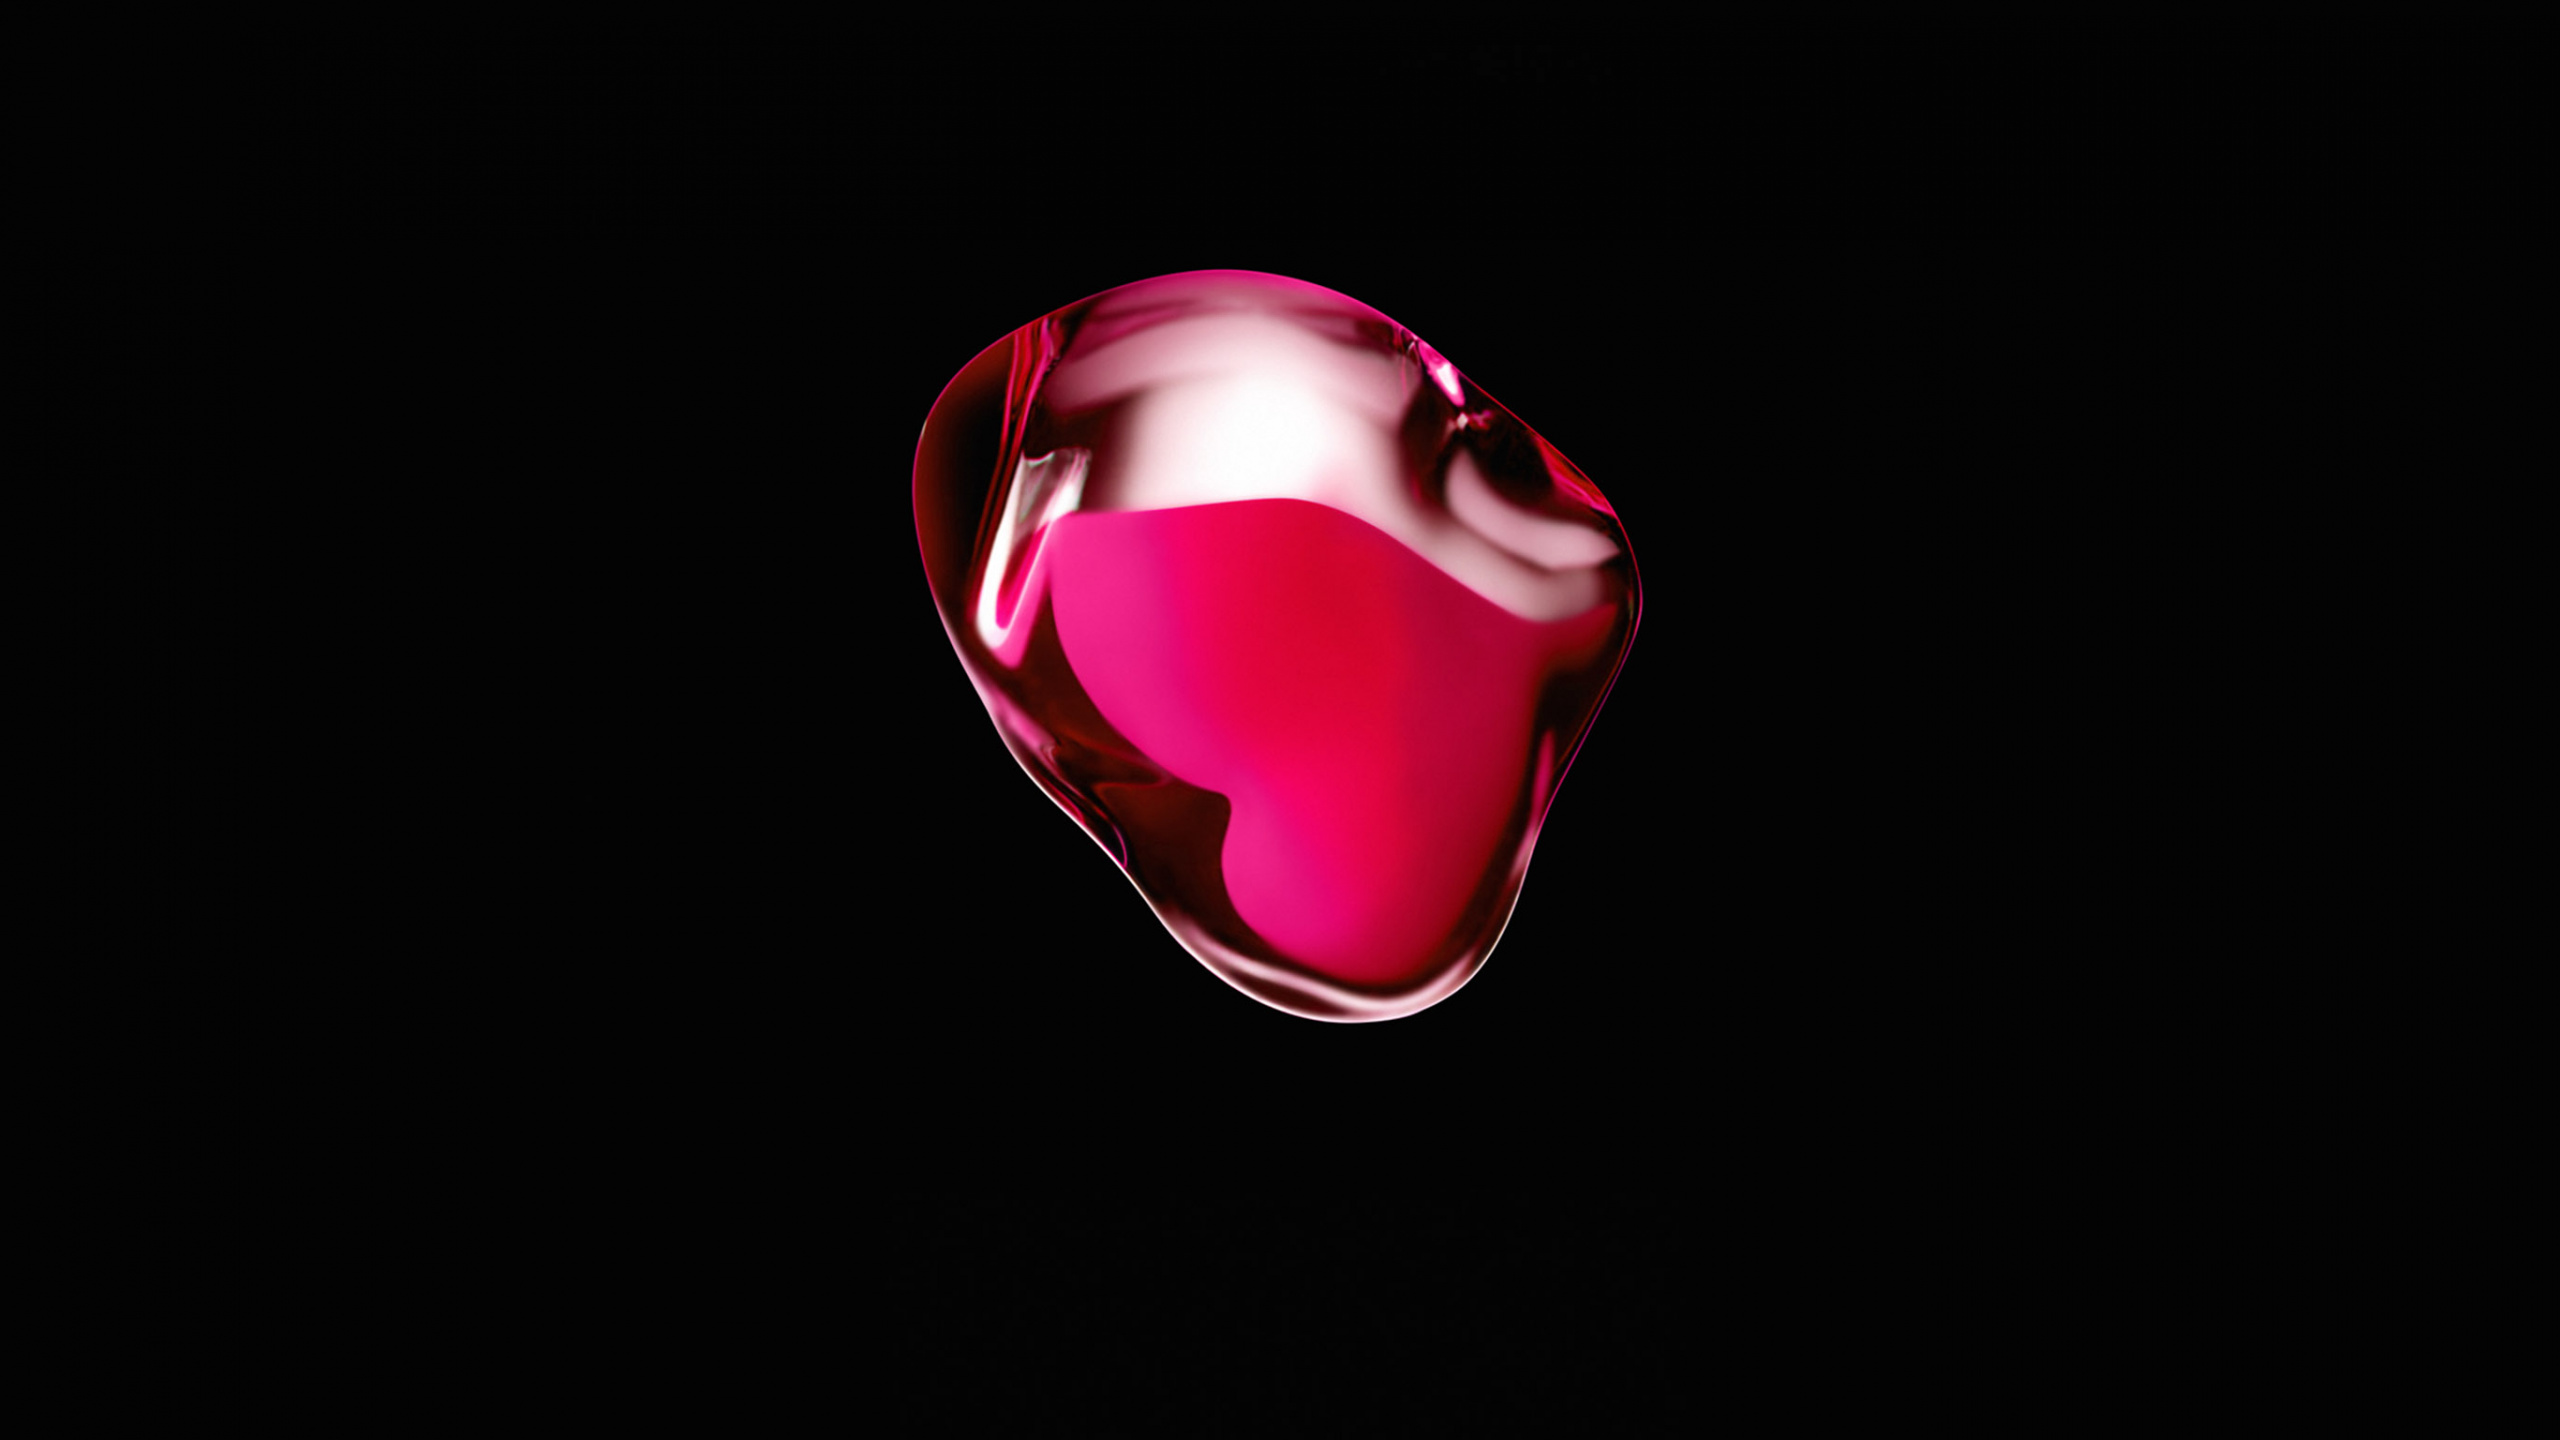 Pink and Silver Heart Ornament. Wallpaper in 2560x1440 Resolution